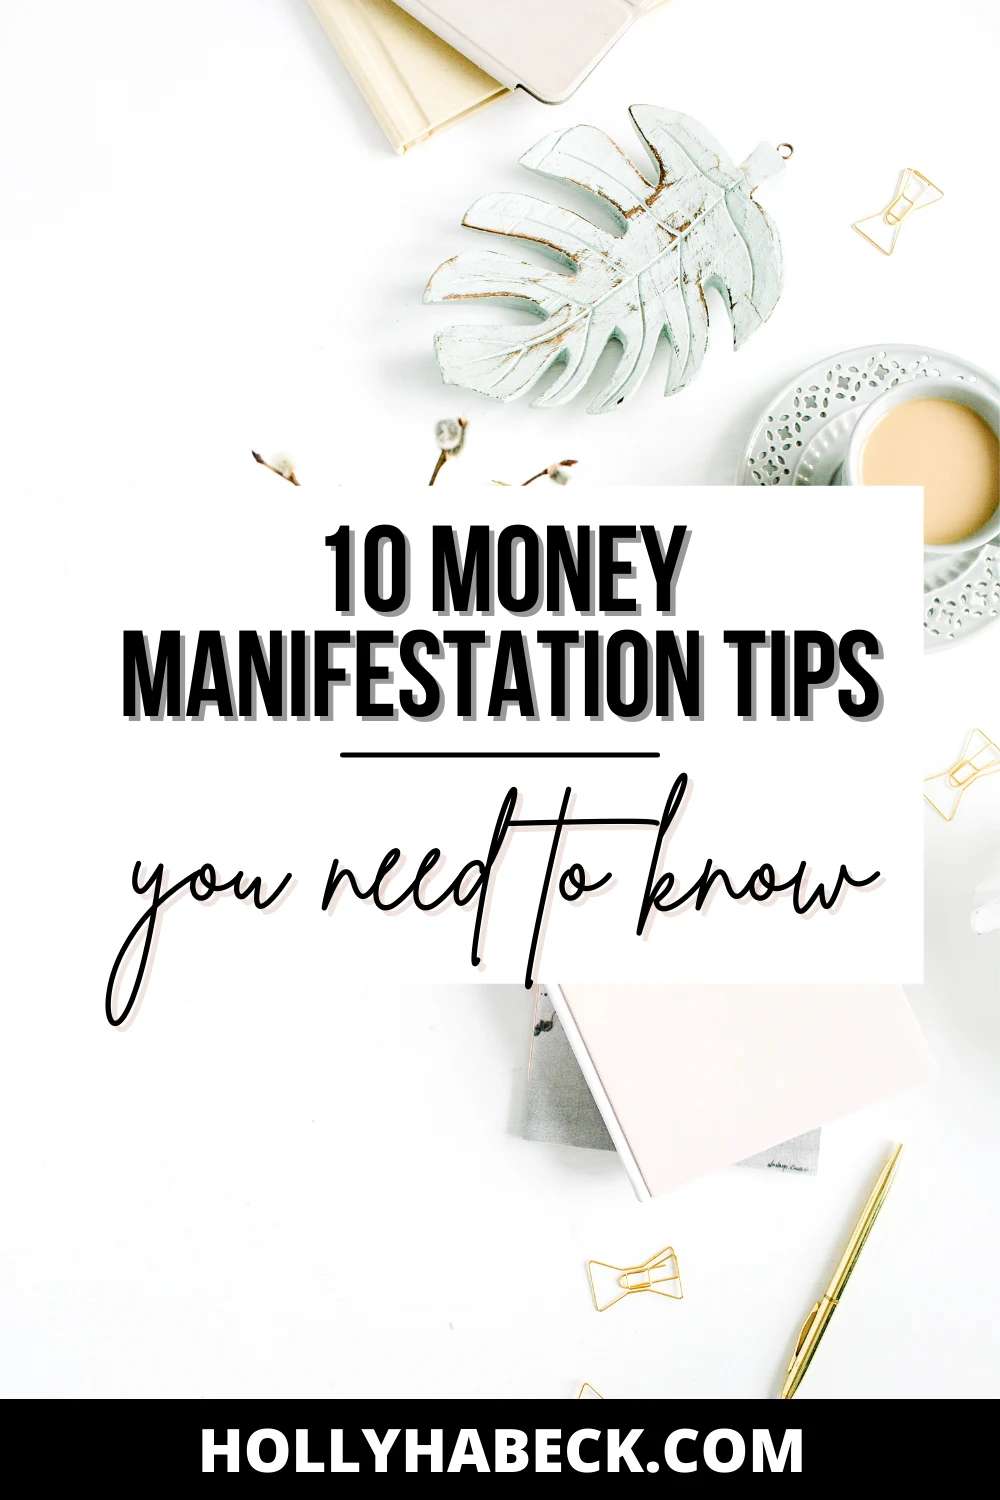 10 Money Manifestation Tips You need to Know